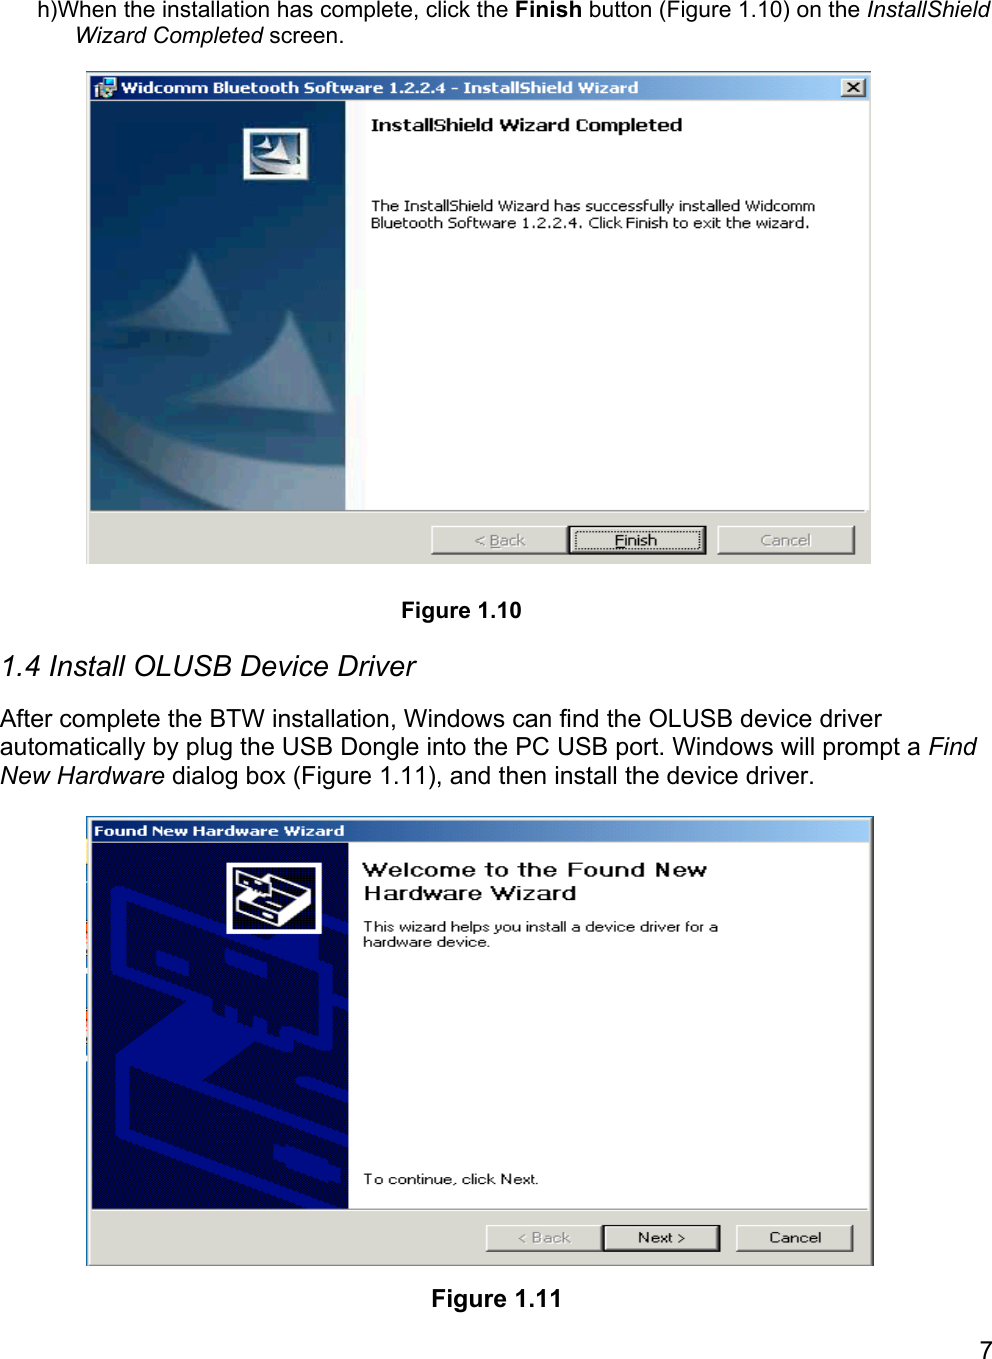 7h)When the installation has complete, click the Finish button (Figure 1.10) on the InstallShieldWizard Completed screen.1.4 Install OLUSB Device DriverAfter complete the BTW installation, Windows can find the OLUSB device driverautomatically by plug the USB Dongle into the PC USB port. Windows will prompt a FindNew Hardware dialog box (Figure 1.11), and then install the device driver.Figure 1.10Figure 1.11